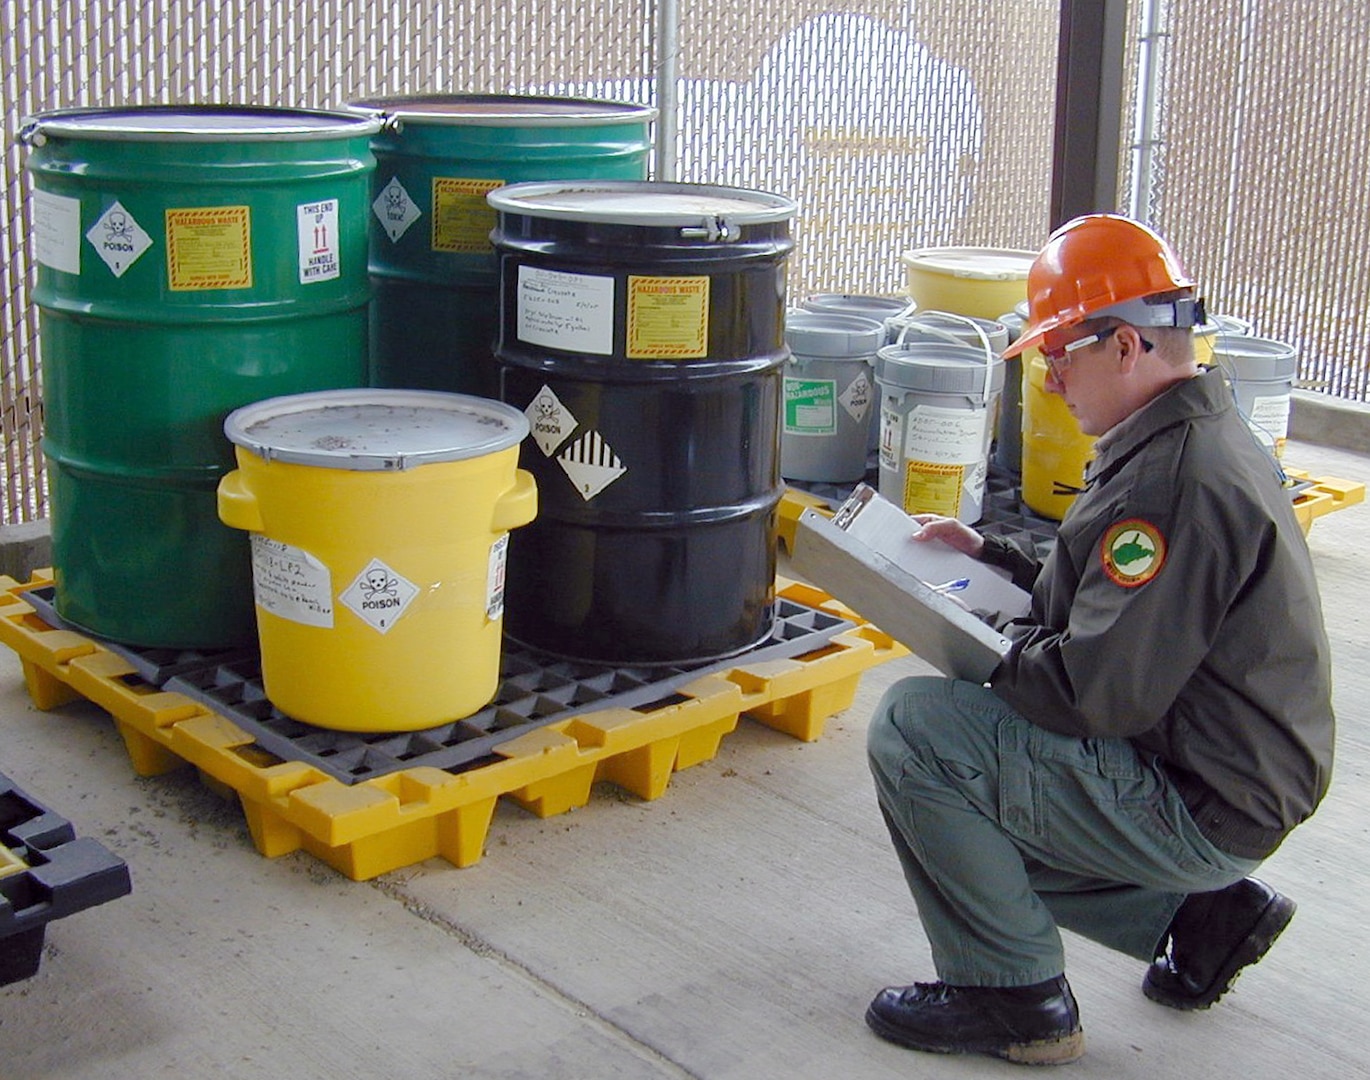 A DLA contractor prepares for the removal of hazardous waste to be removed from a DoD generator site.